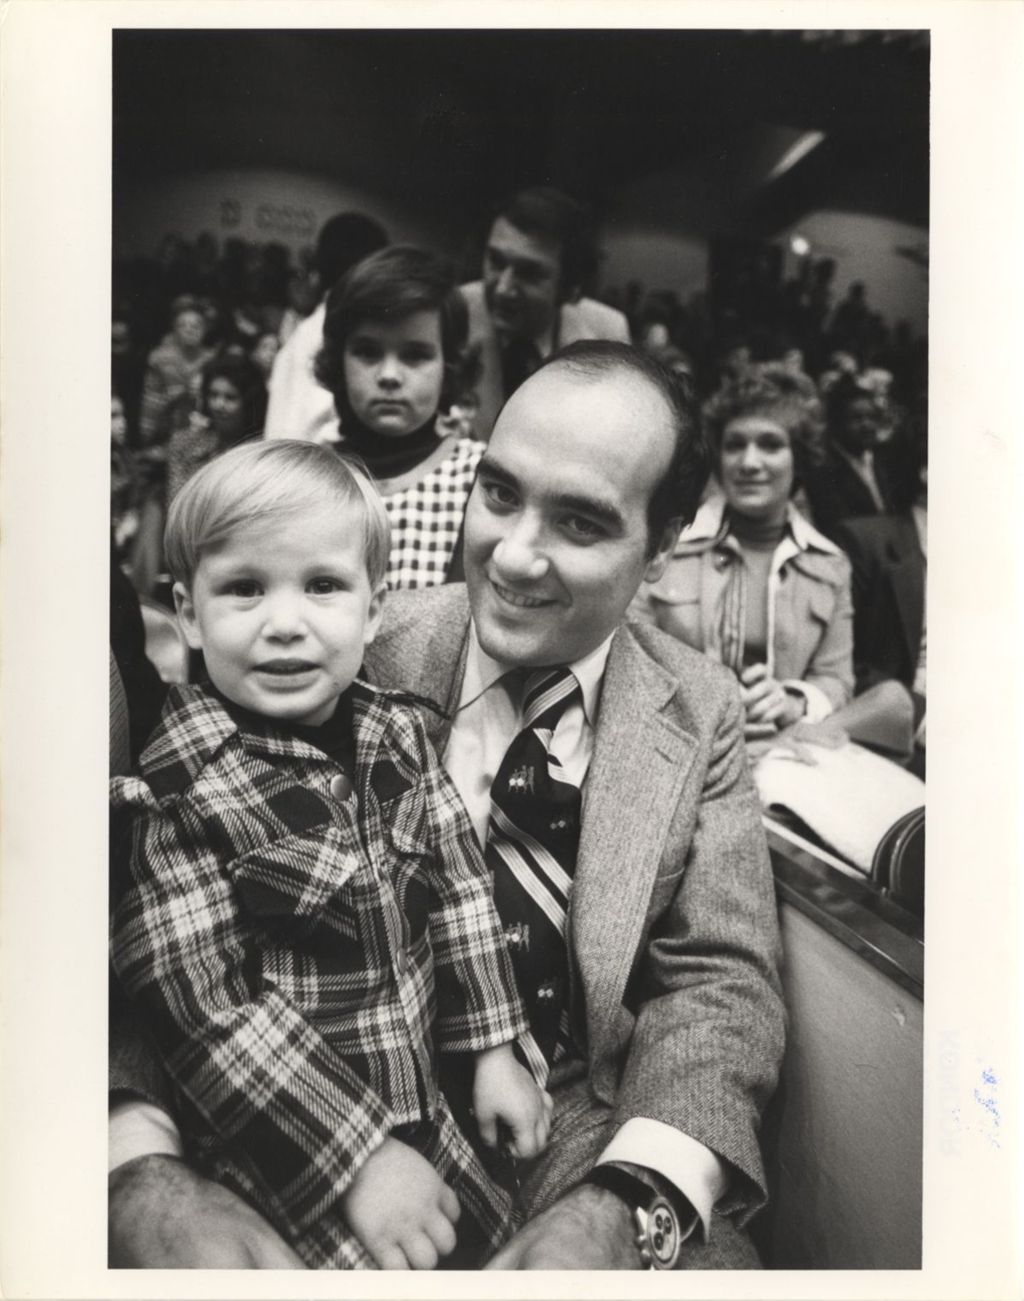 Miniature of William Daley and son at the 11th Ward Regular Democratic Organization Family Circus